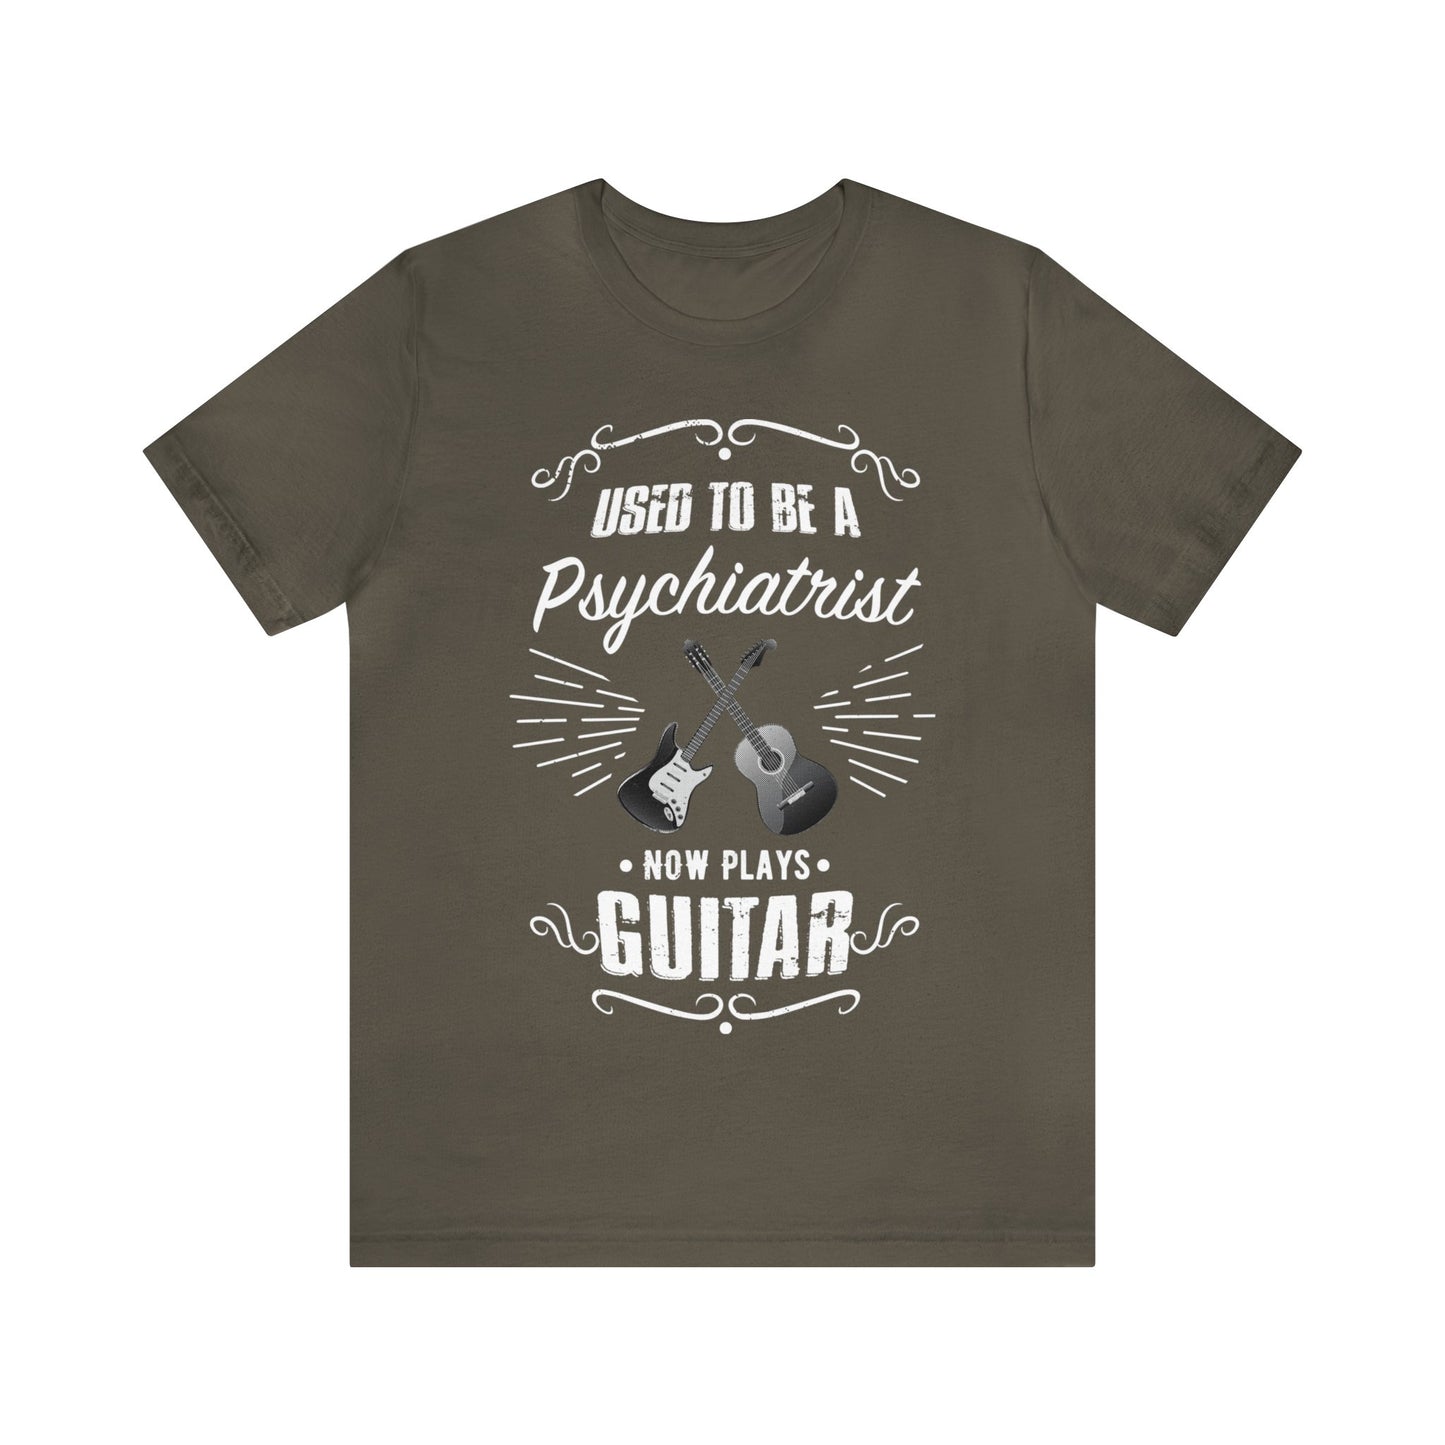 Used to be a PSYCHIATRIST; Now Plays GUITAR - Funny Retirement Gift, Unisex T-shirt Bella+Canvas 3001, dark colors for amateur musician/guitar player